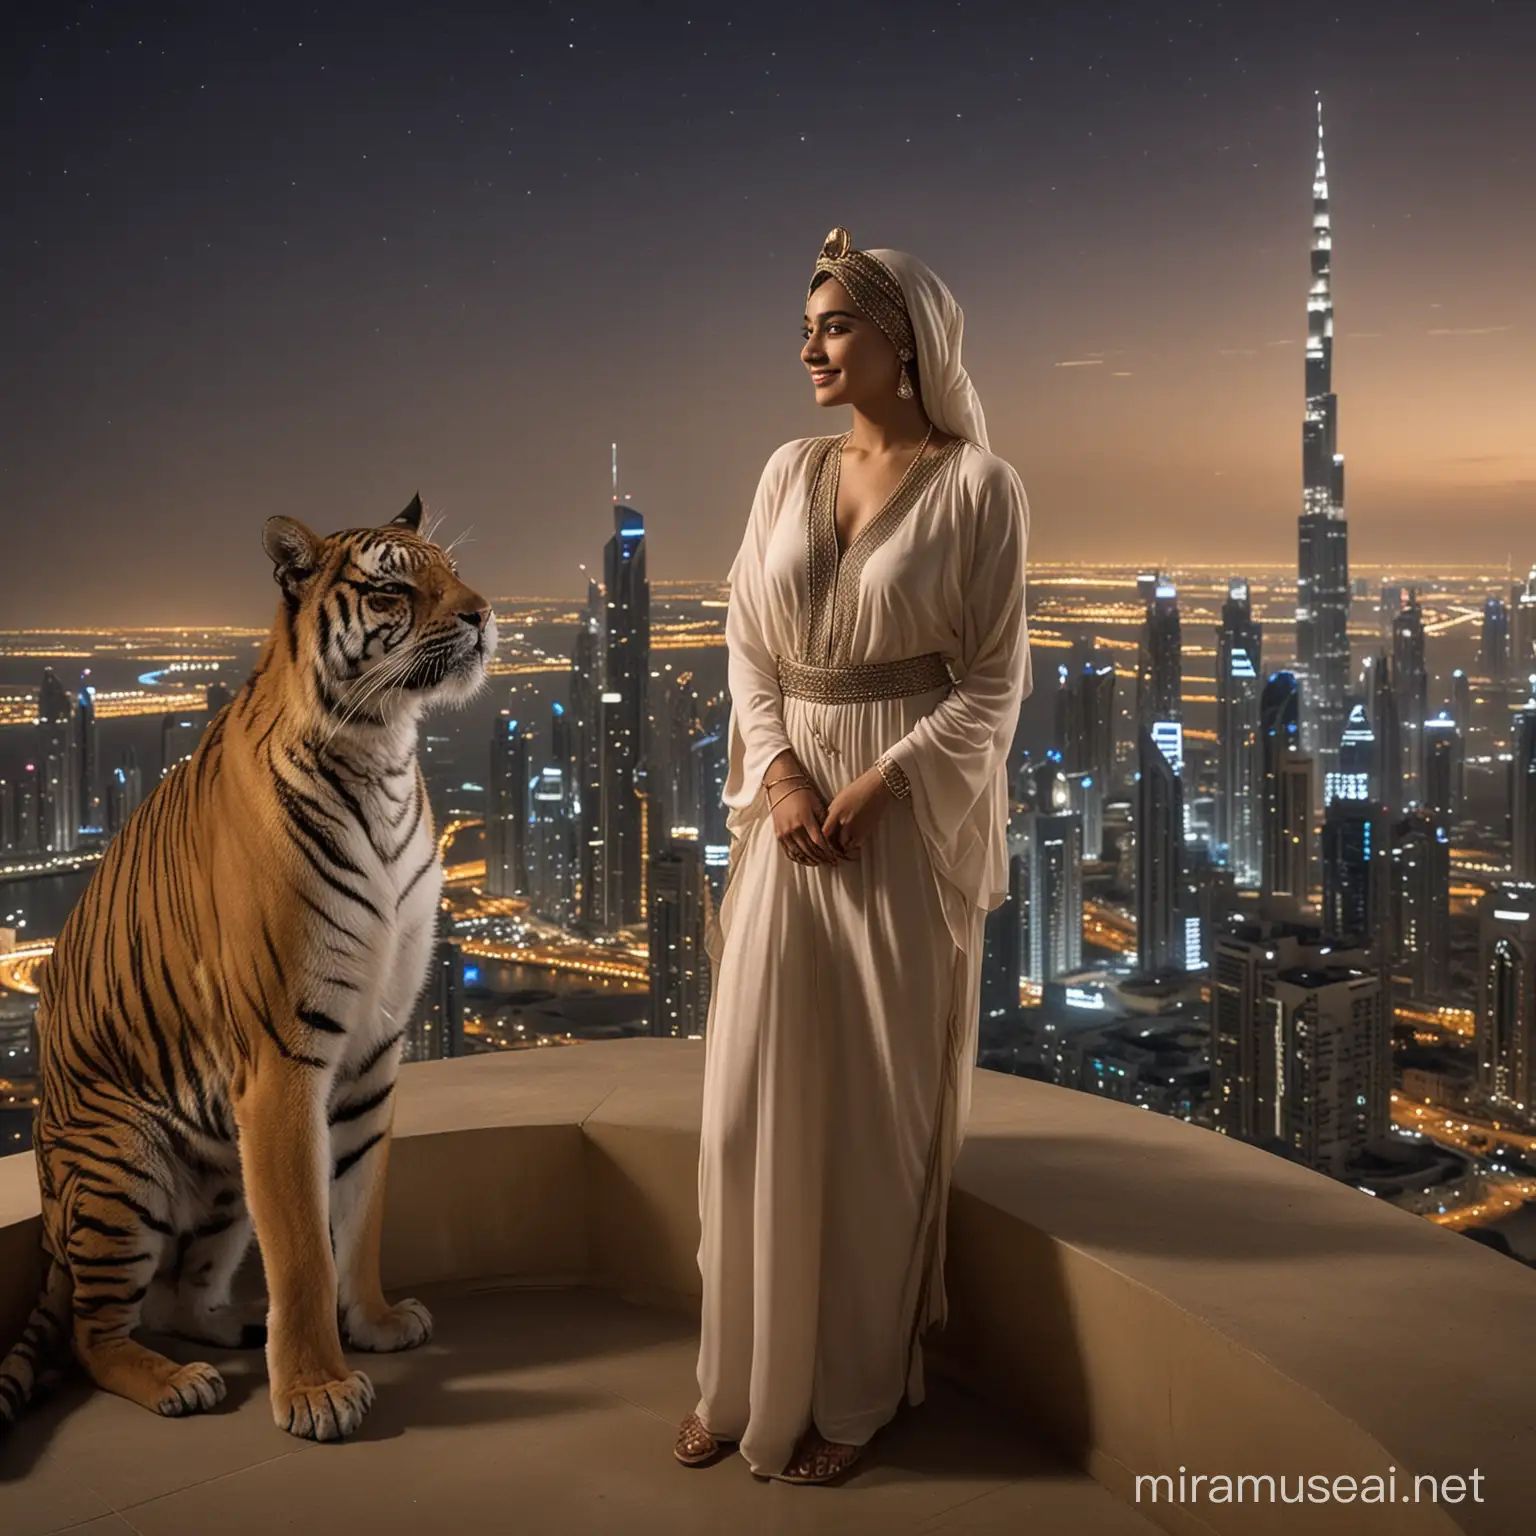 Emirati Woman with Tiger on HighRise Penthouse Loggia at Night